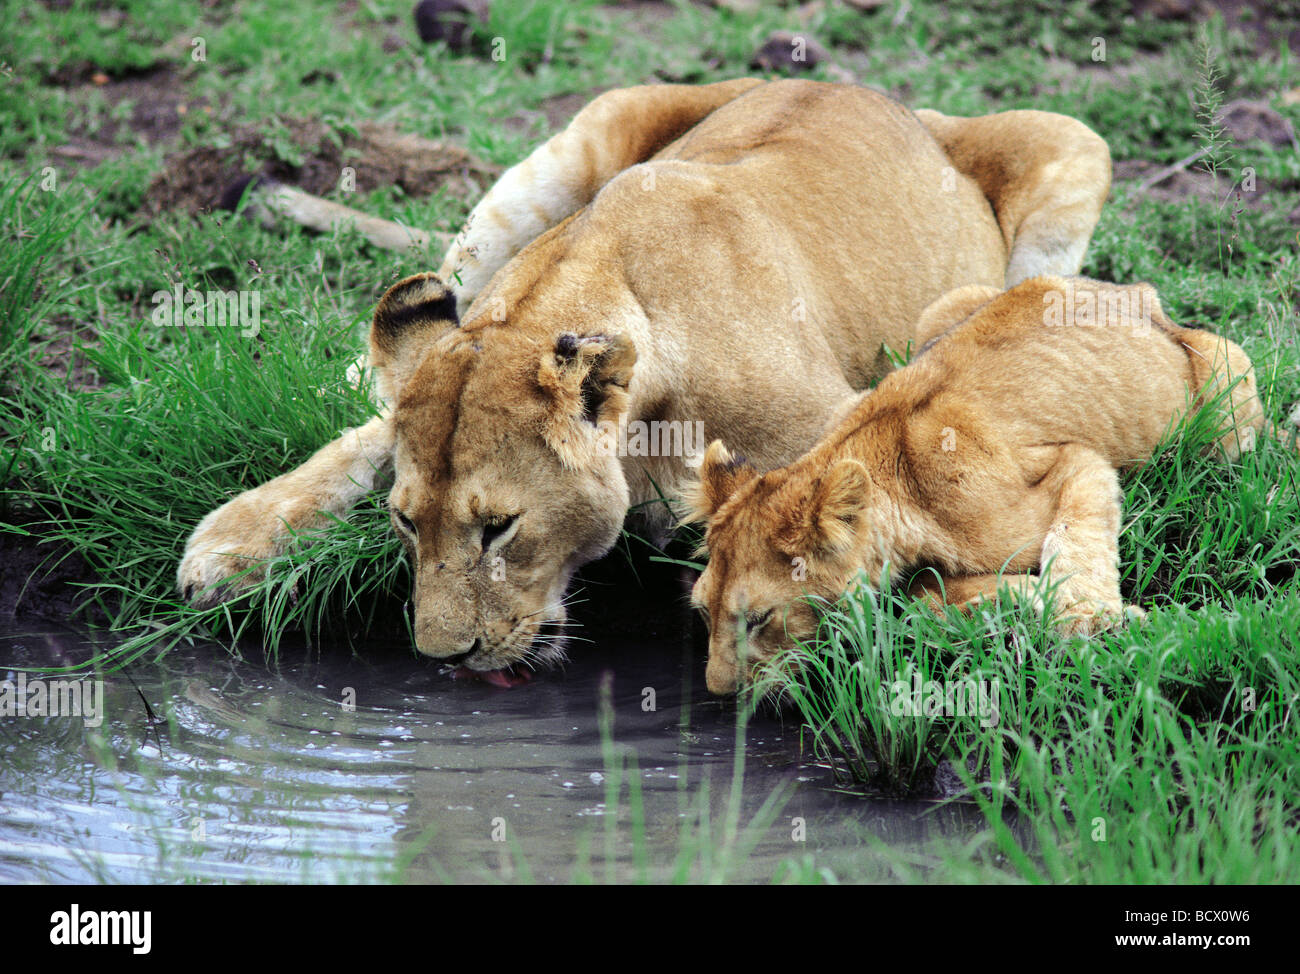 Lioness with cub drinking from a small pool Masai Mara National Reserve Kenya East Africa Stock Photo